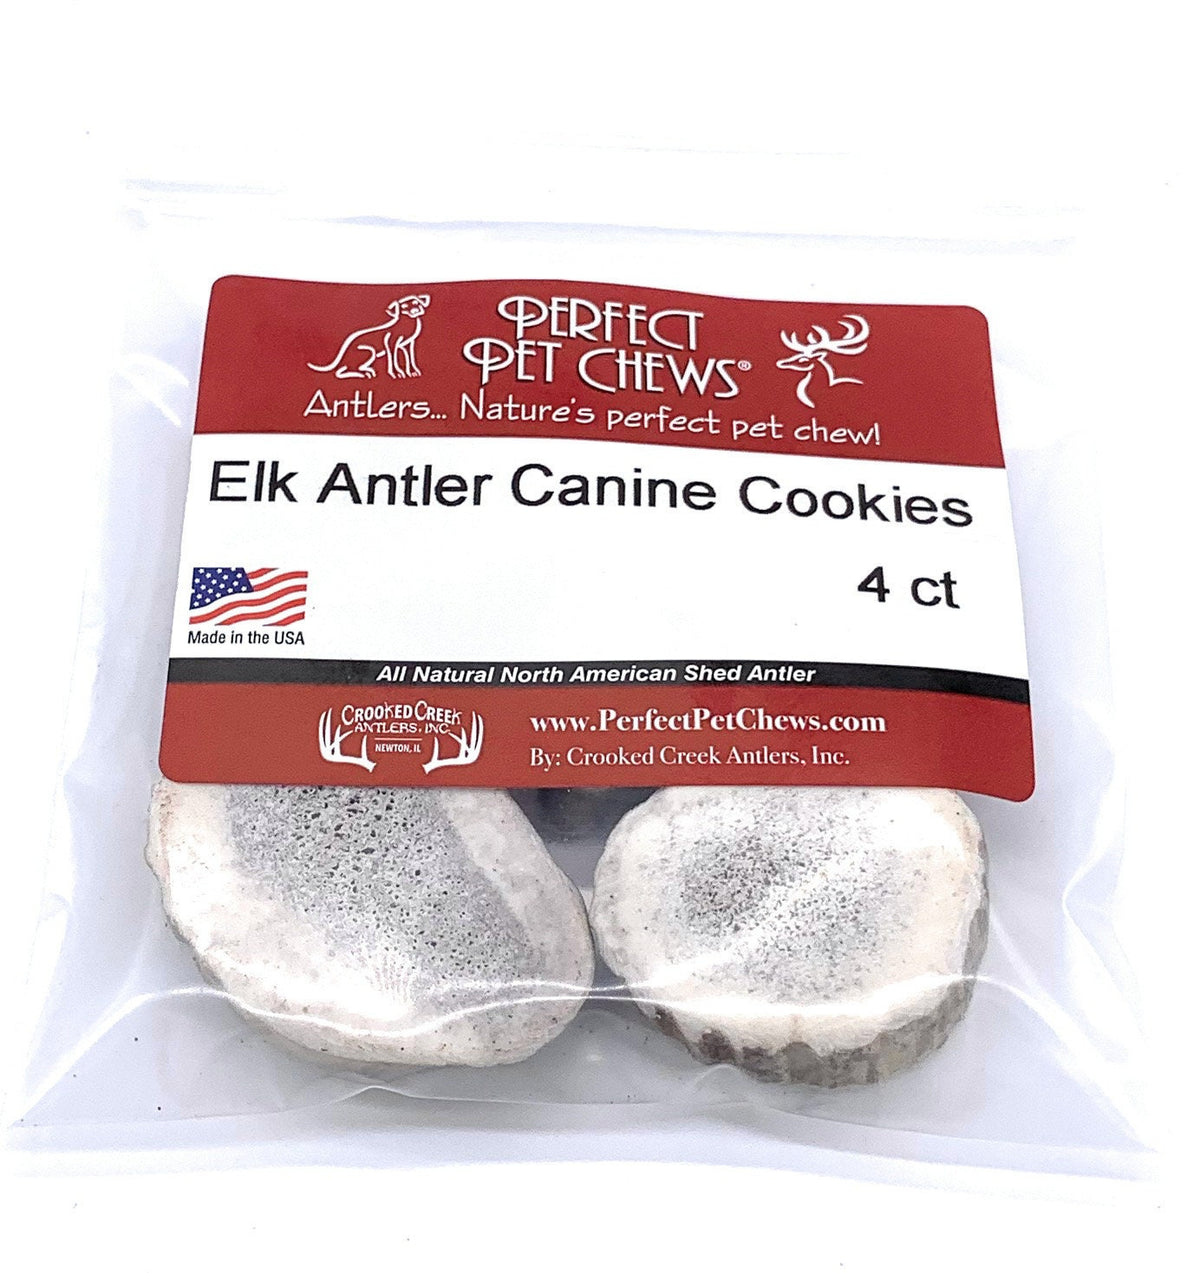 Perfect Pet Chew: Canine Cookies 4 ct.-All Natural, Grade A, Premium Antler Dog Treats, Organic Dog Chews, Naturally Shed Antlers from USA